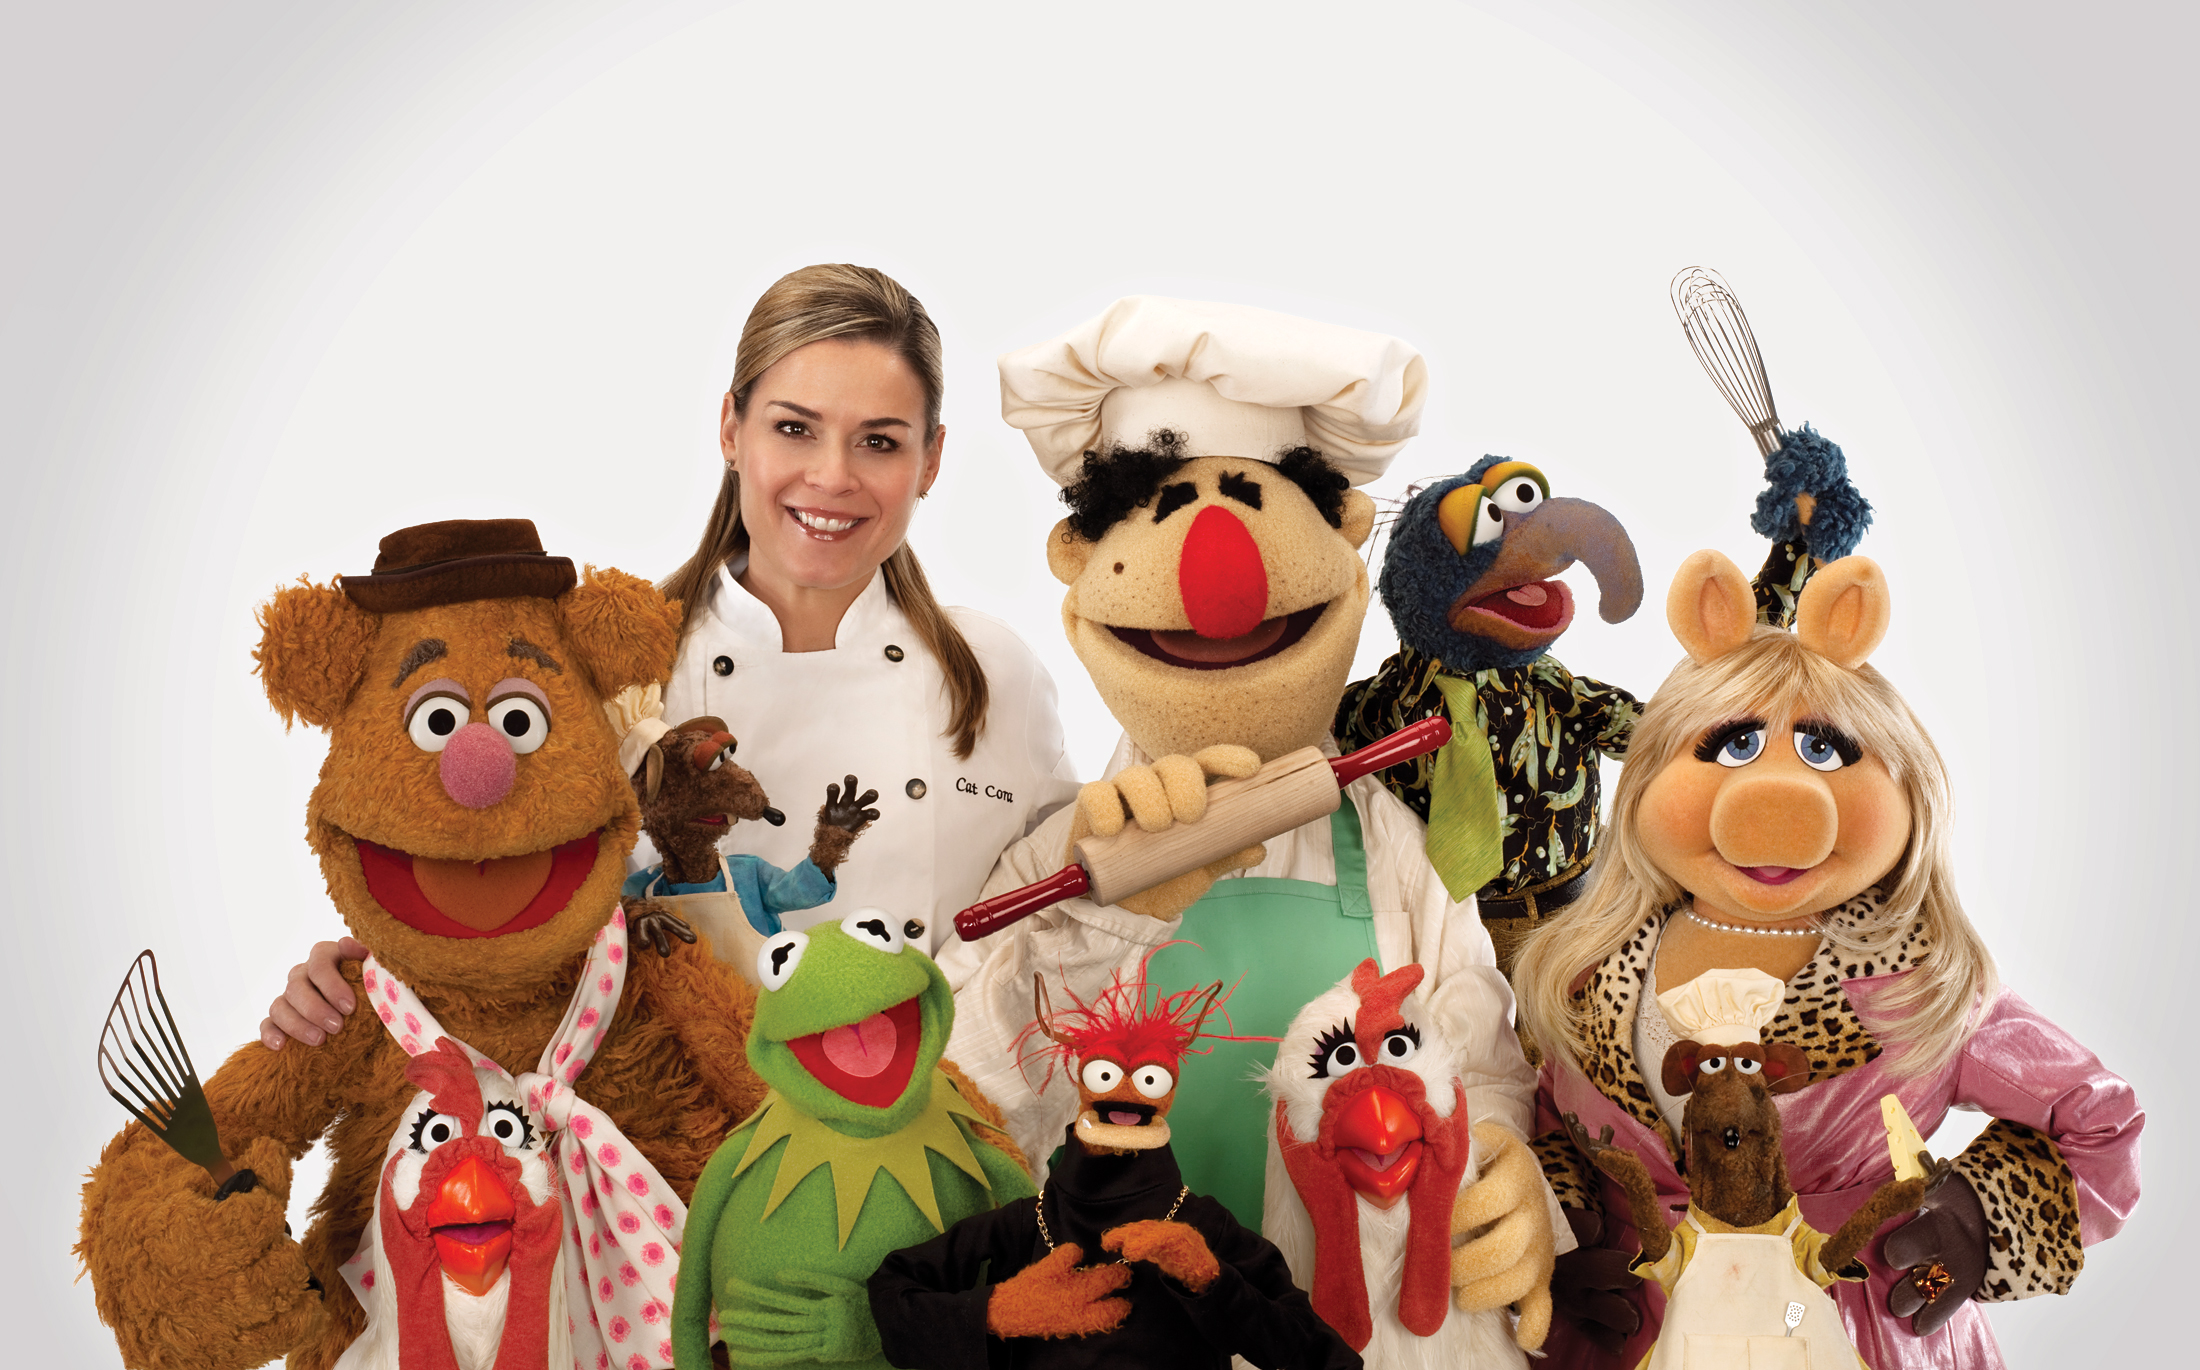 The Muppets #5